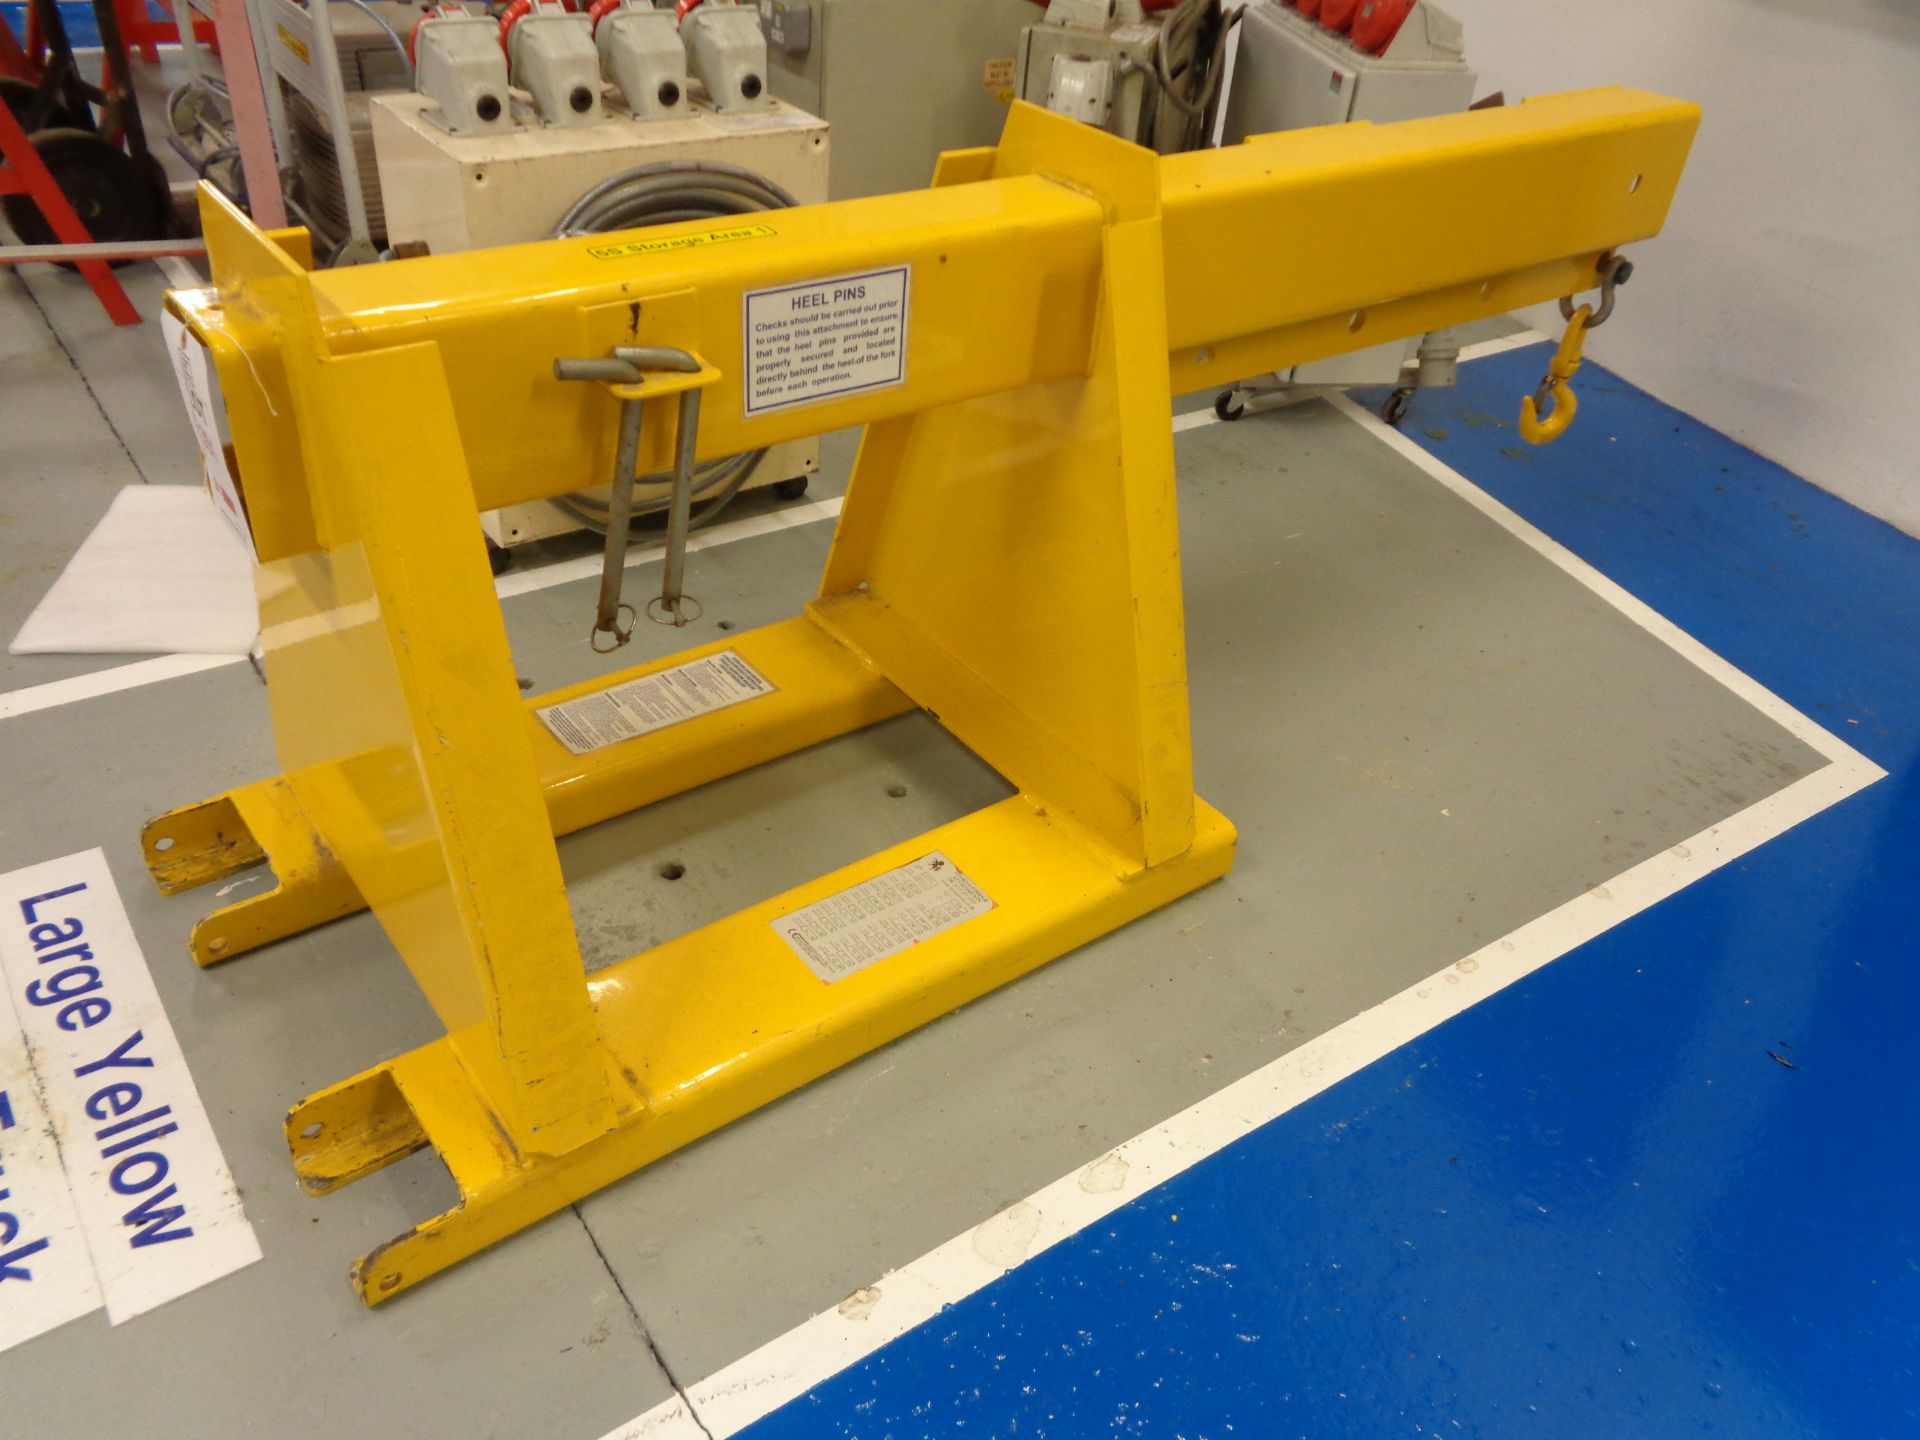 Invicta Forks & Attachments IFS-3.0-0P forkift mounting jib serial no. 73978 (2011), capacity 1500kg